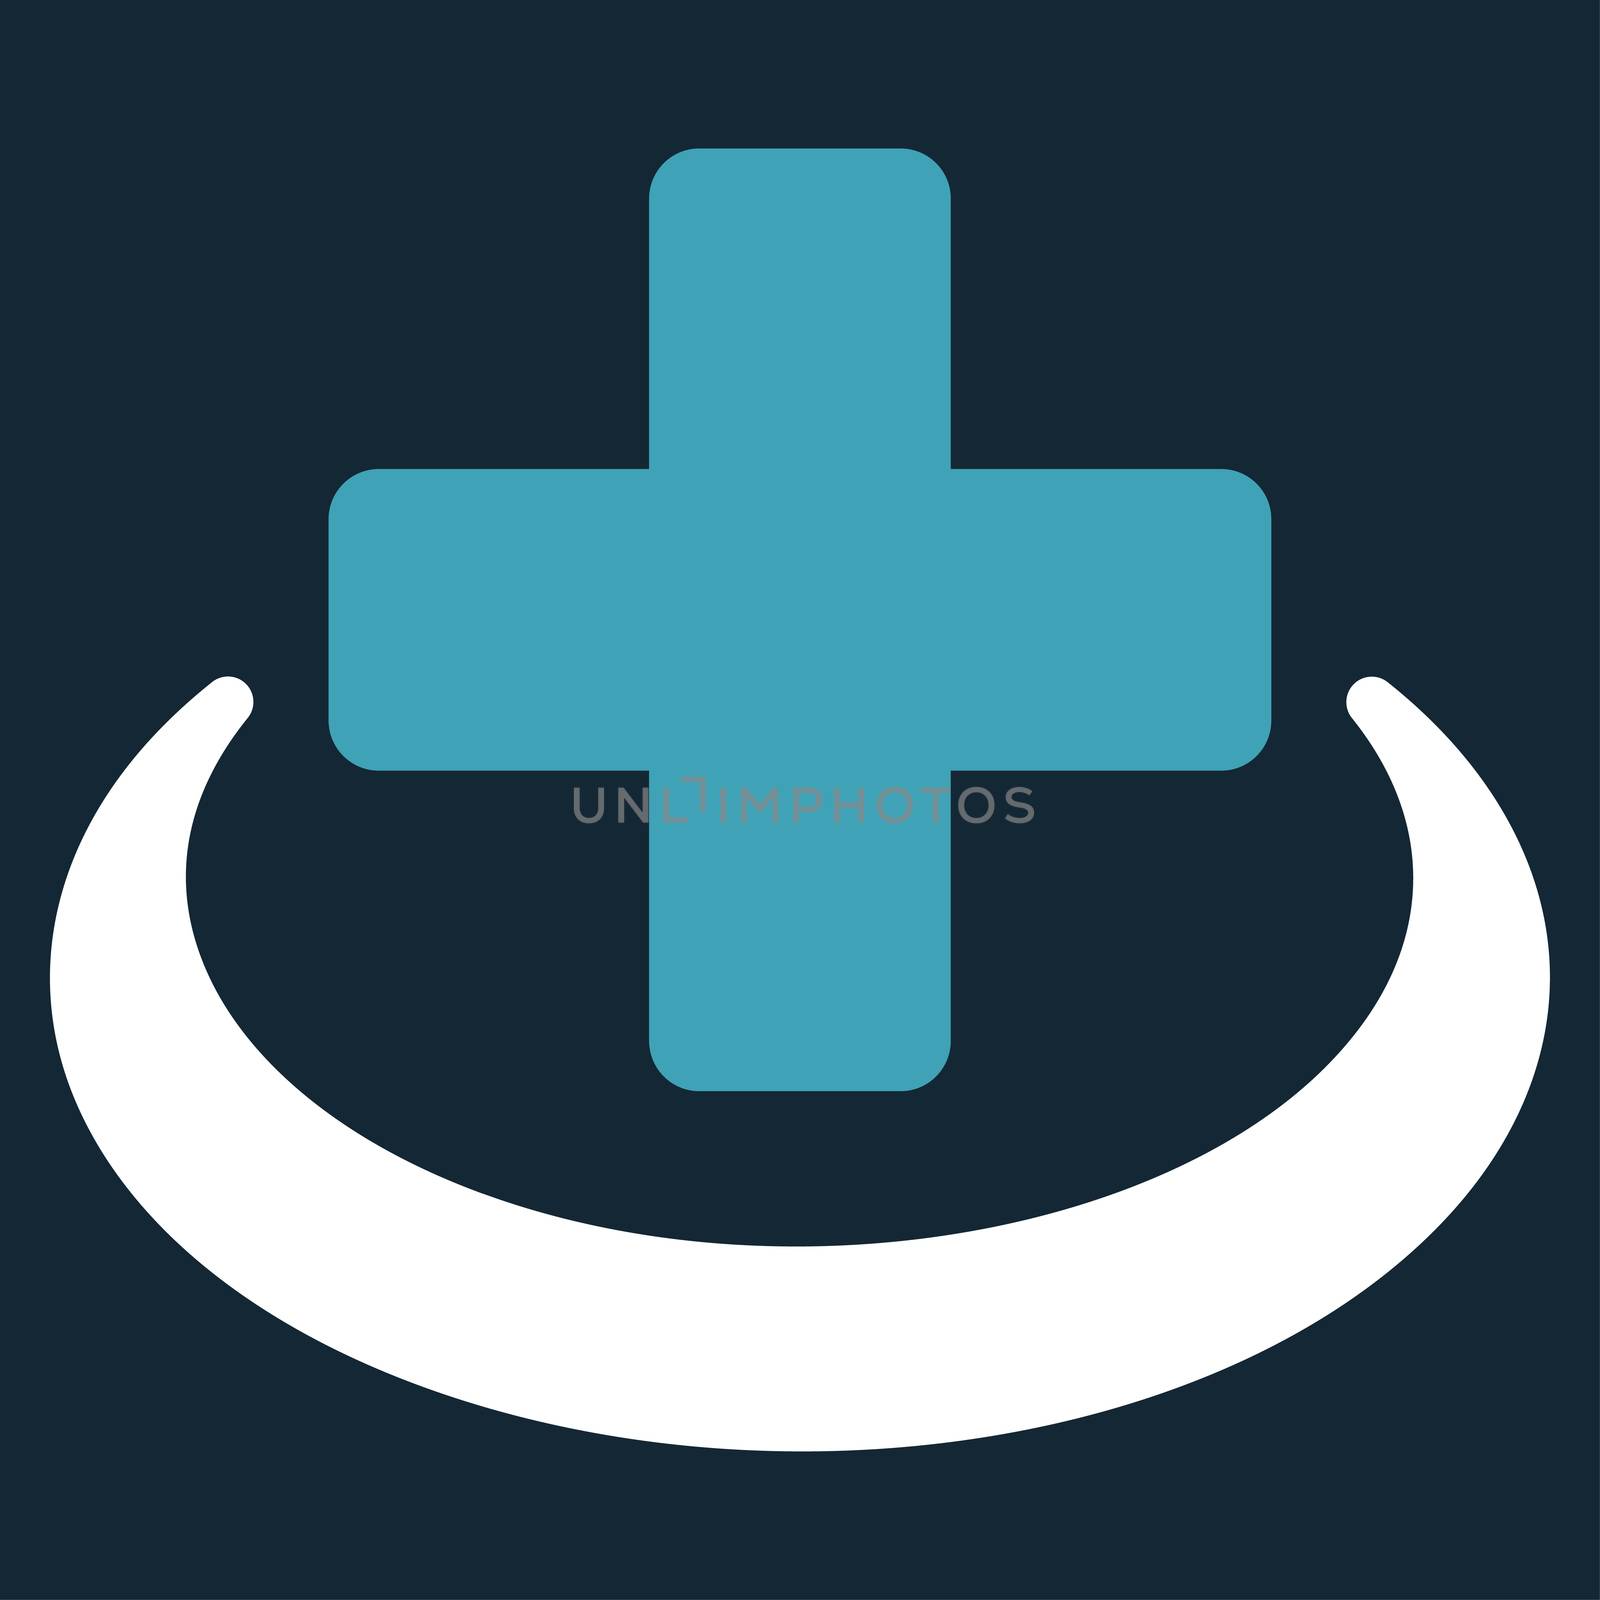 Medical Community raster icon. Style is bicolor flat symbol, blue and white colors, rounded angles, dark blue background.